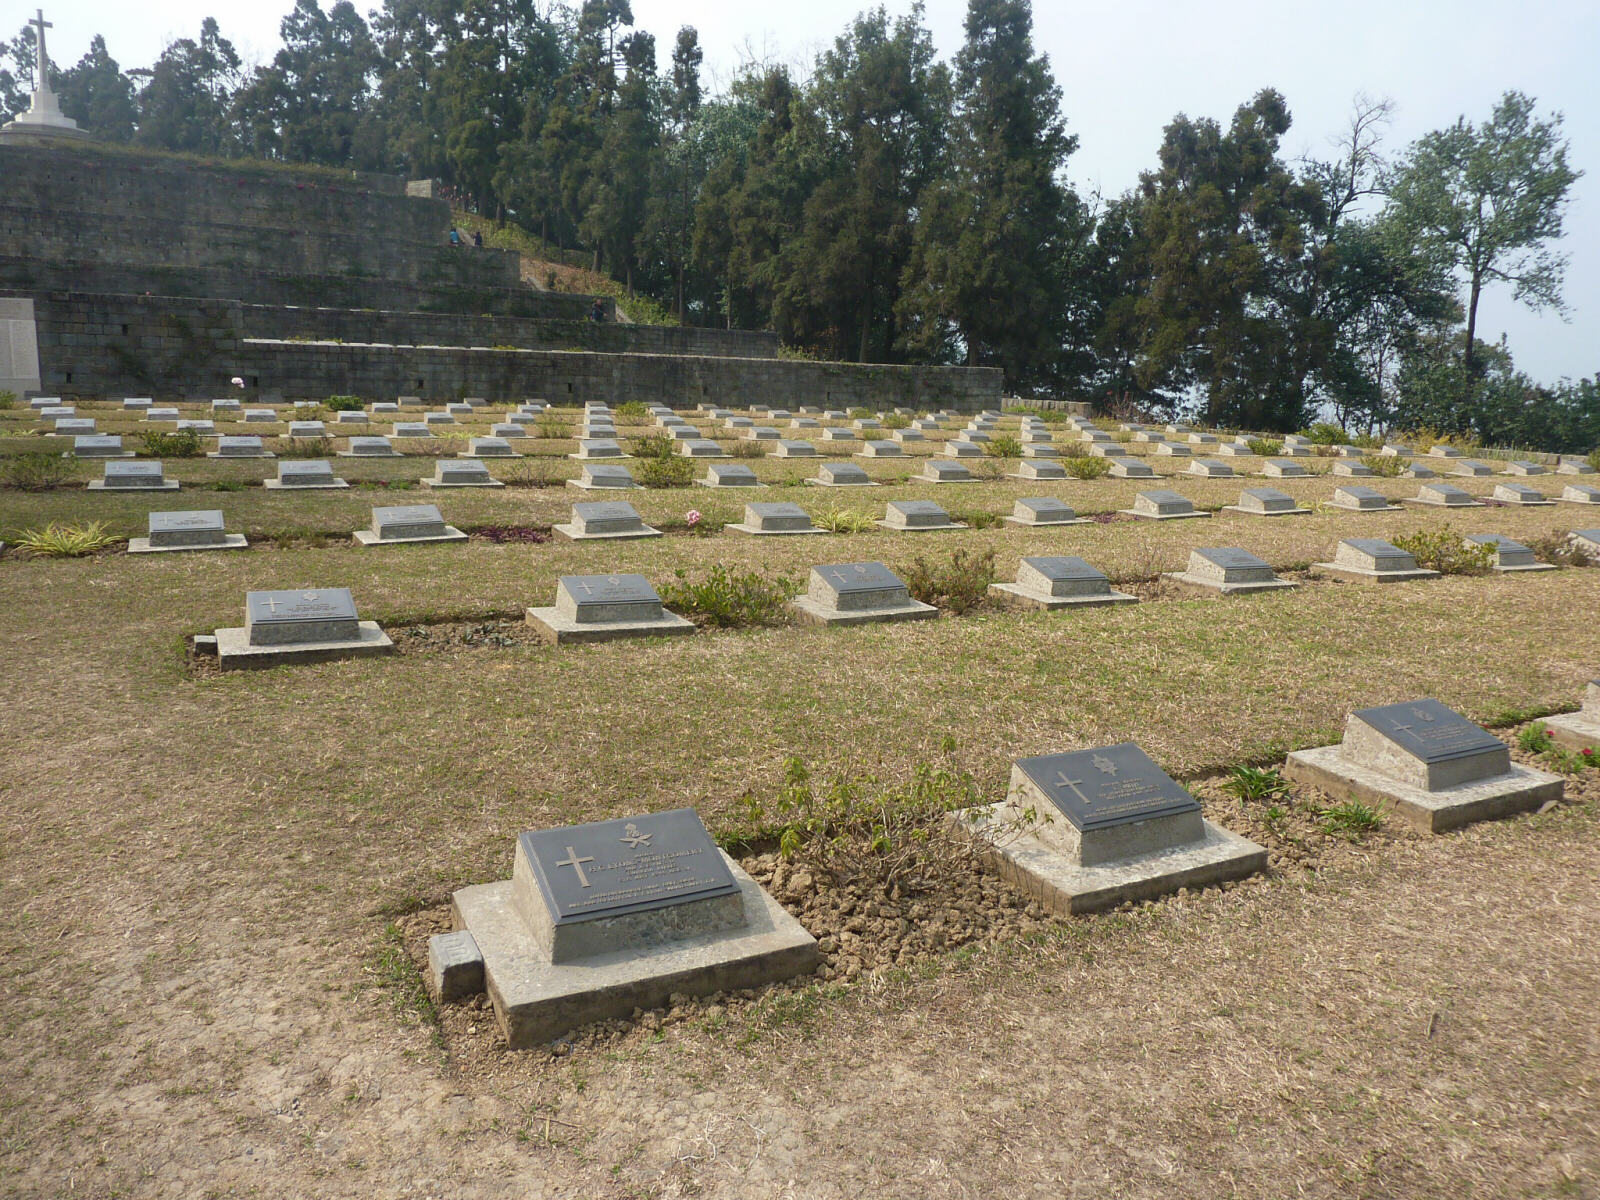 The war cemetery in Kohima, Nagaland state, India